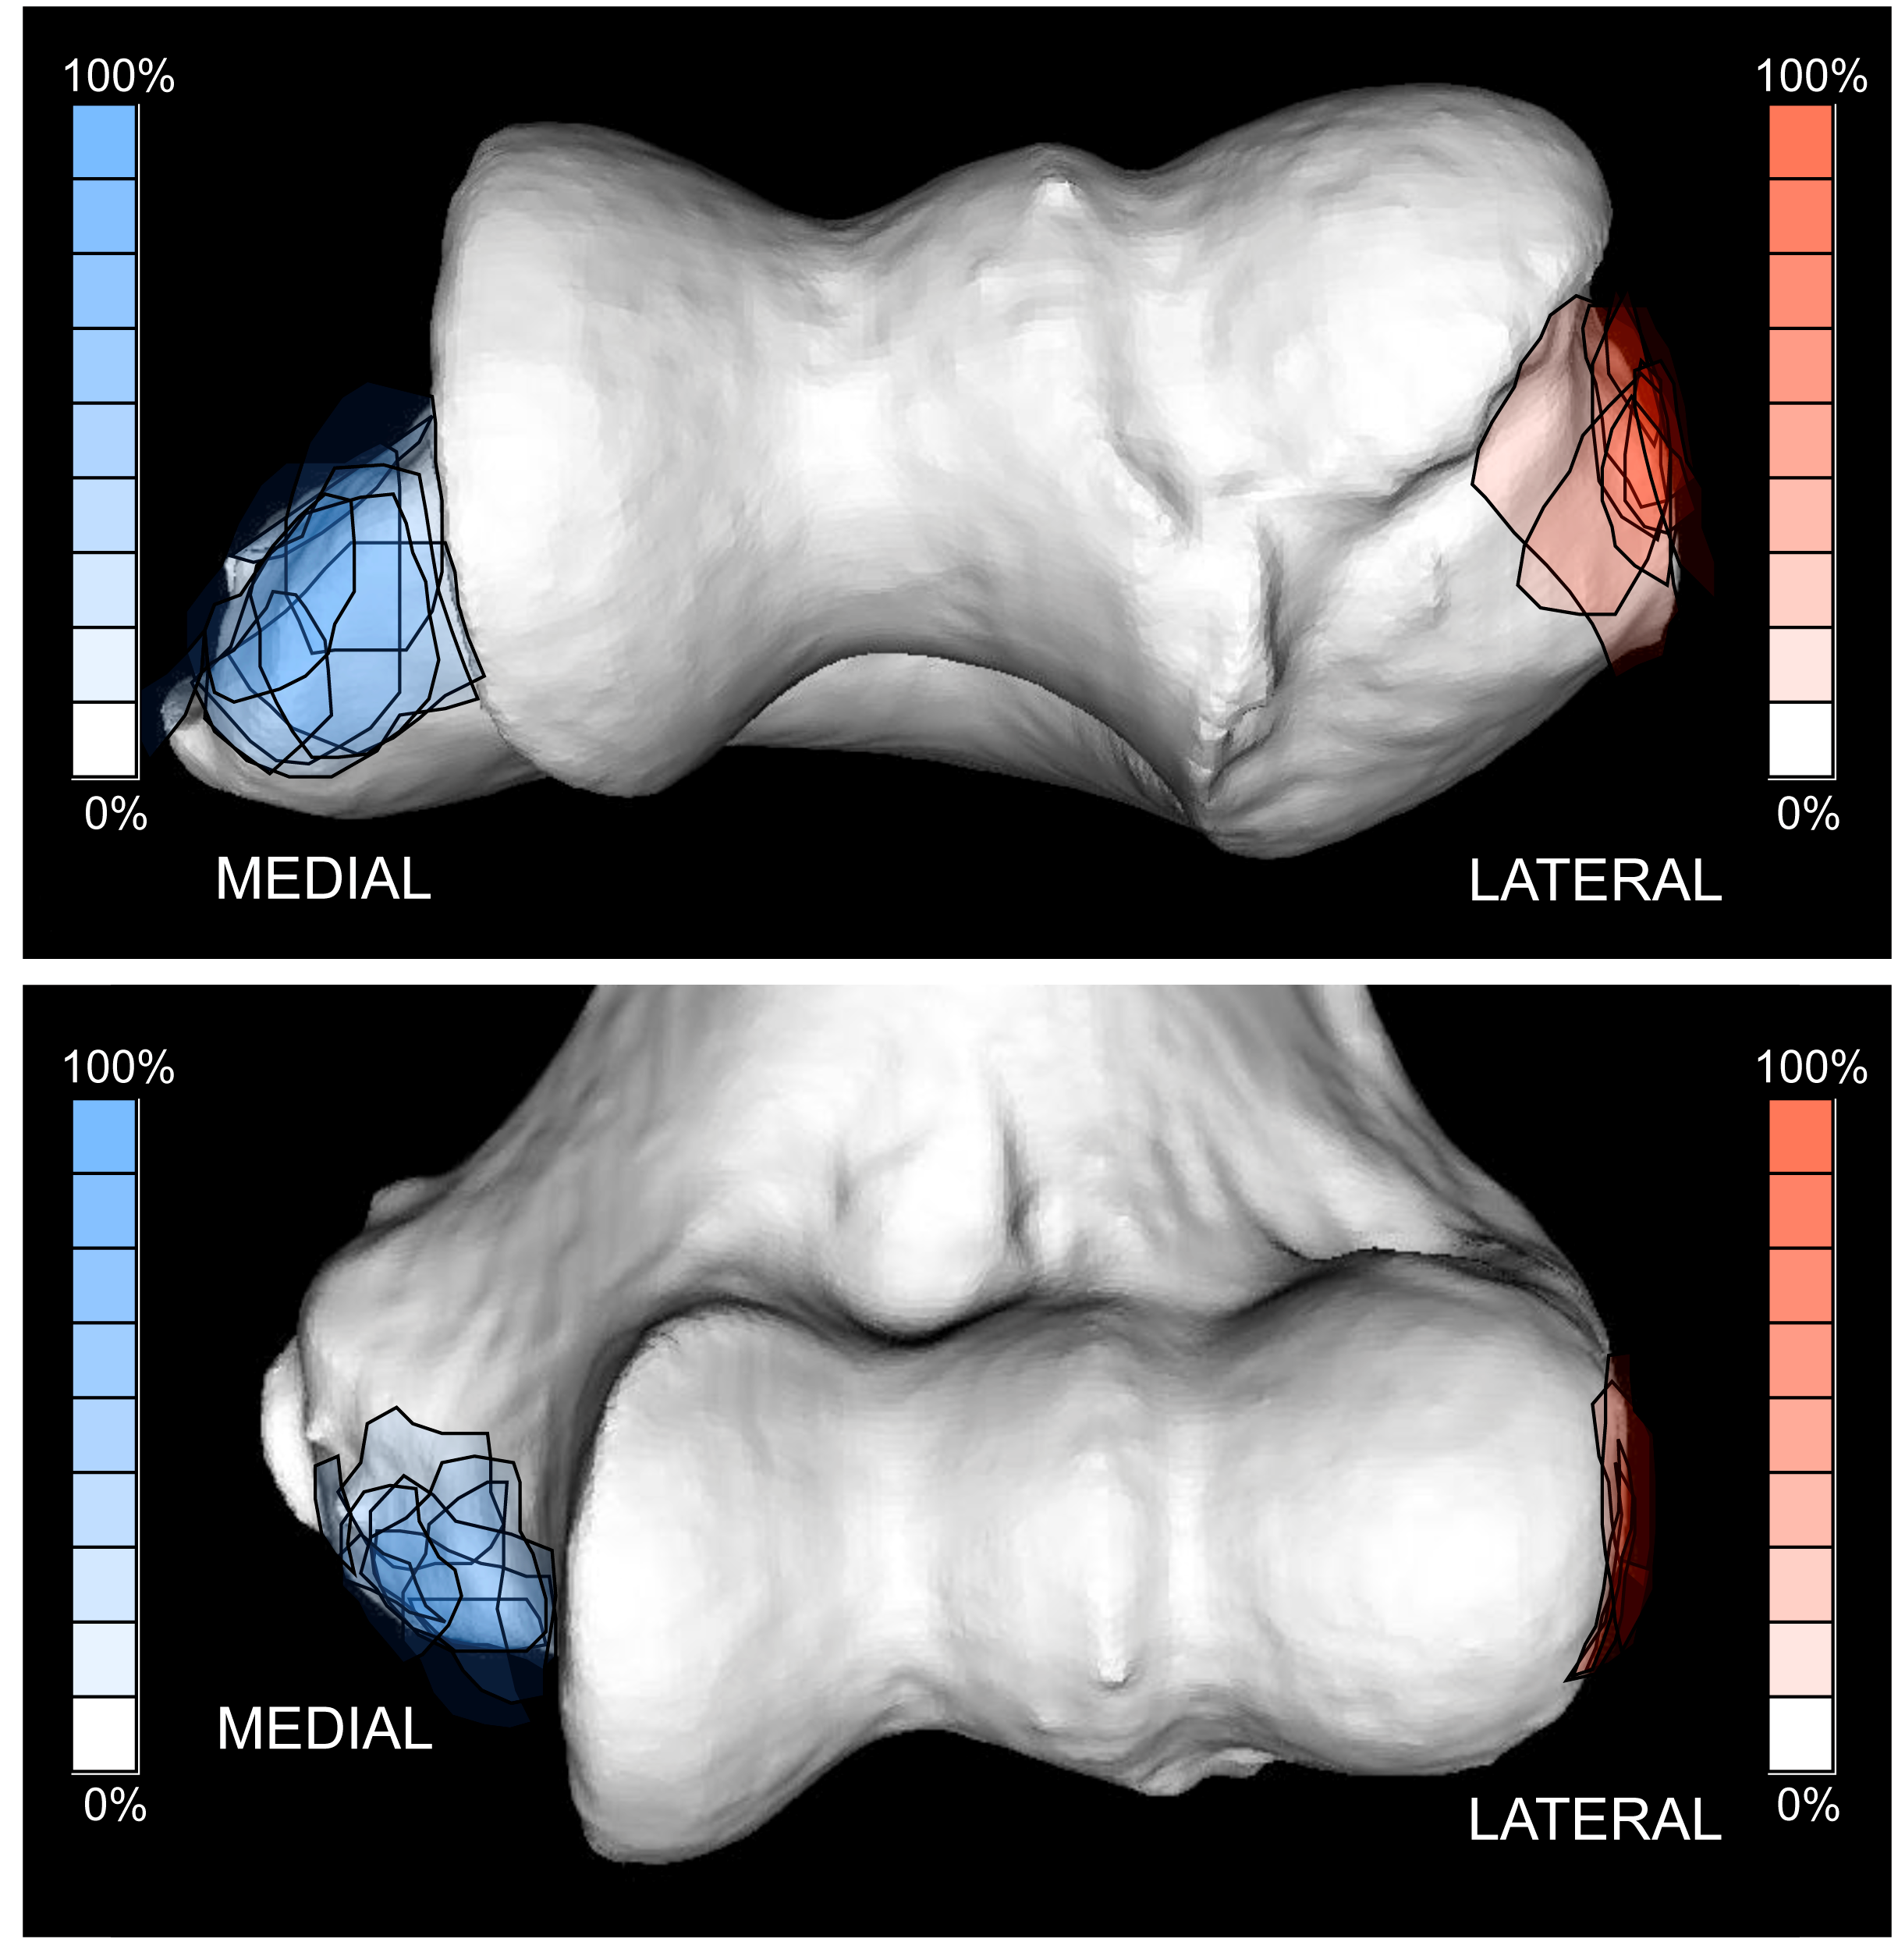 Figure 7: Origin of the medial (blue) and lateral ligaments (red) of the elbow from cadaveric dissection. Note the position of the origin of the medial ligament on the medial epicondyle that is at risk of disruption in medial epicondylectomy.